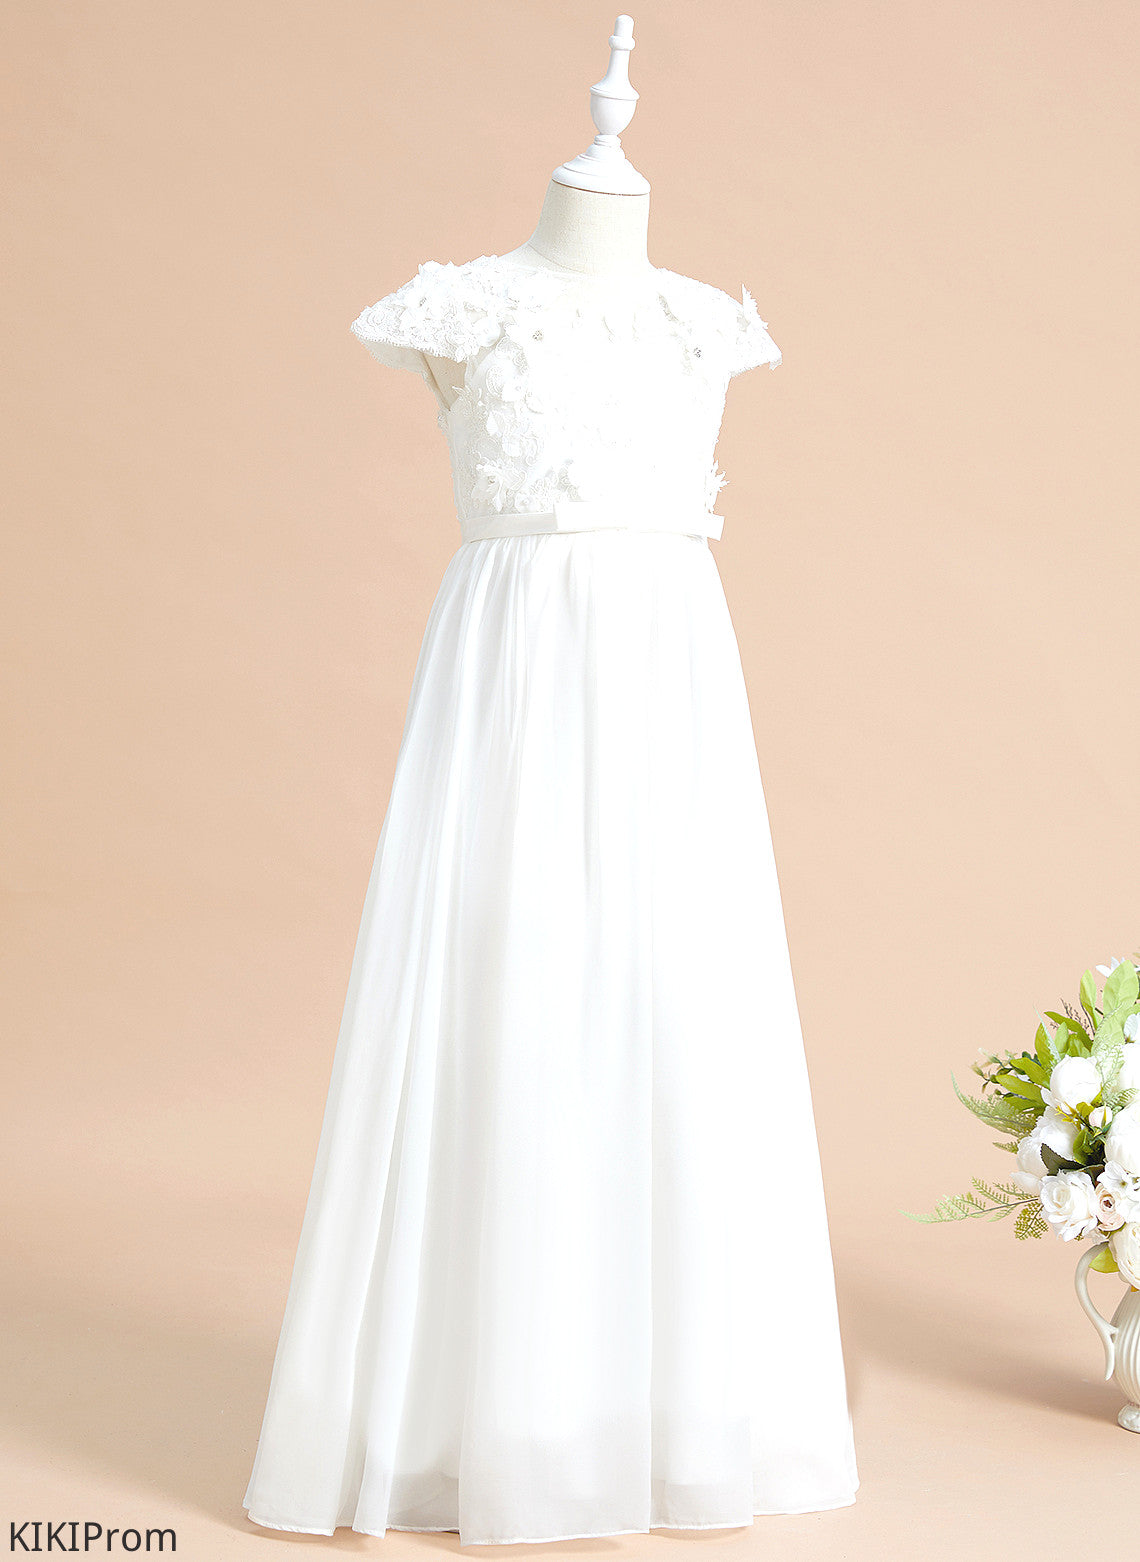 Flower A-Line With Tamia Flower(s) Sleeves - Floor-length Dress Scoop Chiffon/Lace Flower Girl Dresses Neck Girl Short